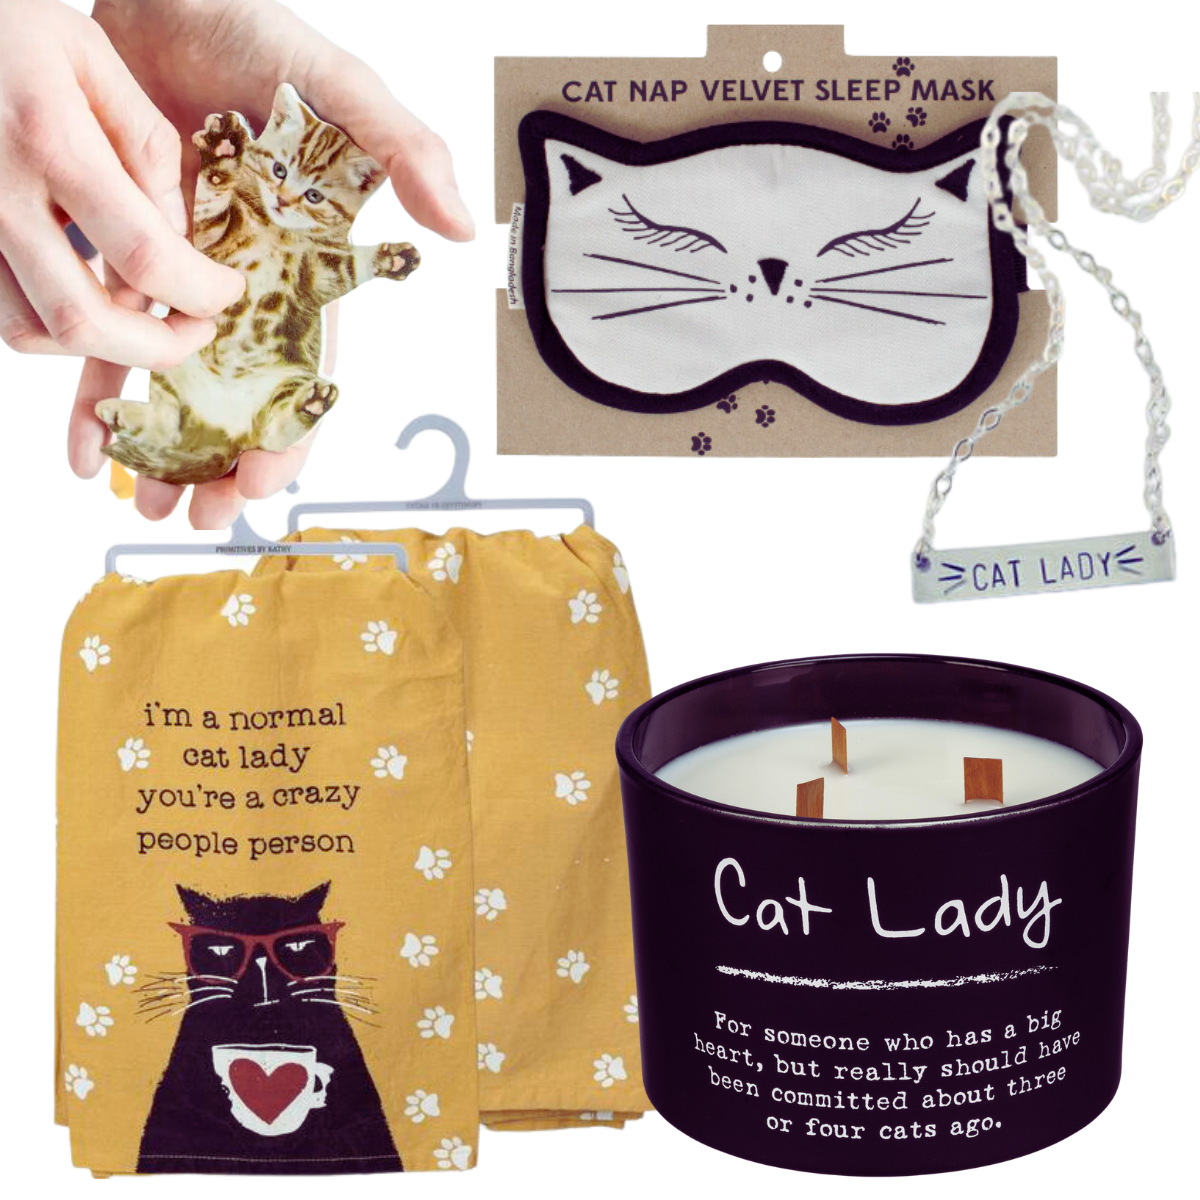 cat lady gift box that includes a dish towel with the words "I Am A Normal Cat Lady You Are A Crazy People Person" and all over paw print, a cat lady lavender scented candle with the words  "Cat Lady: For someone who has a big heart, but really should have been committed about three or four cats ago", a handmade sterling silver cat lady necklace, a cat shaped nail file and a cat sleep mask